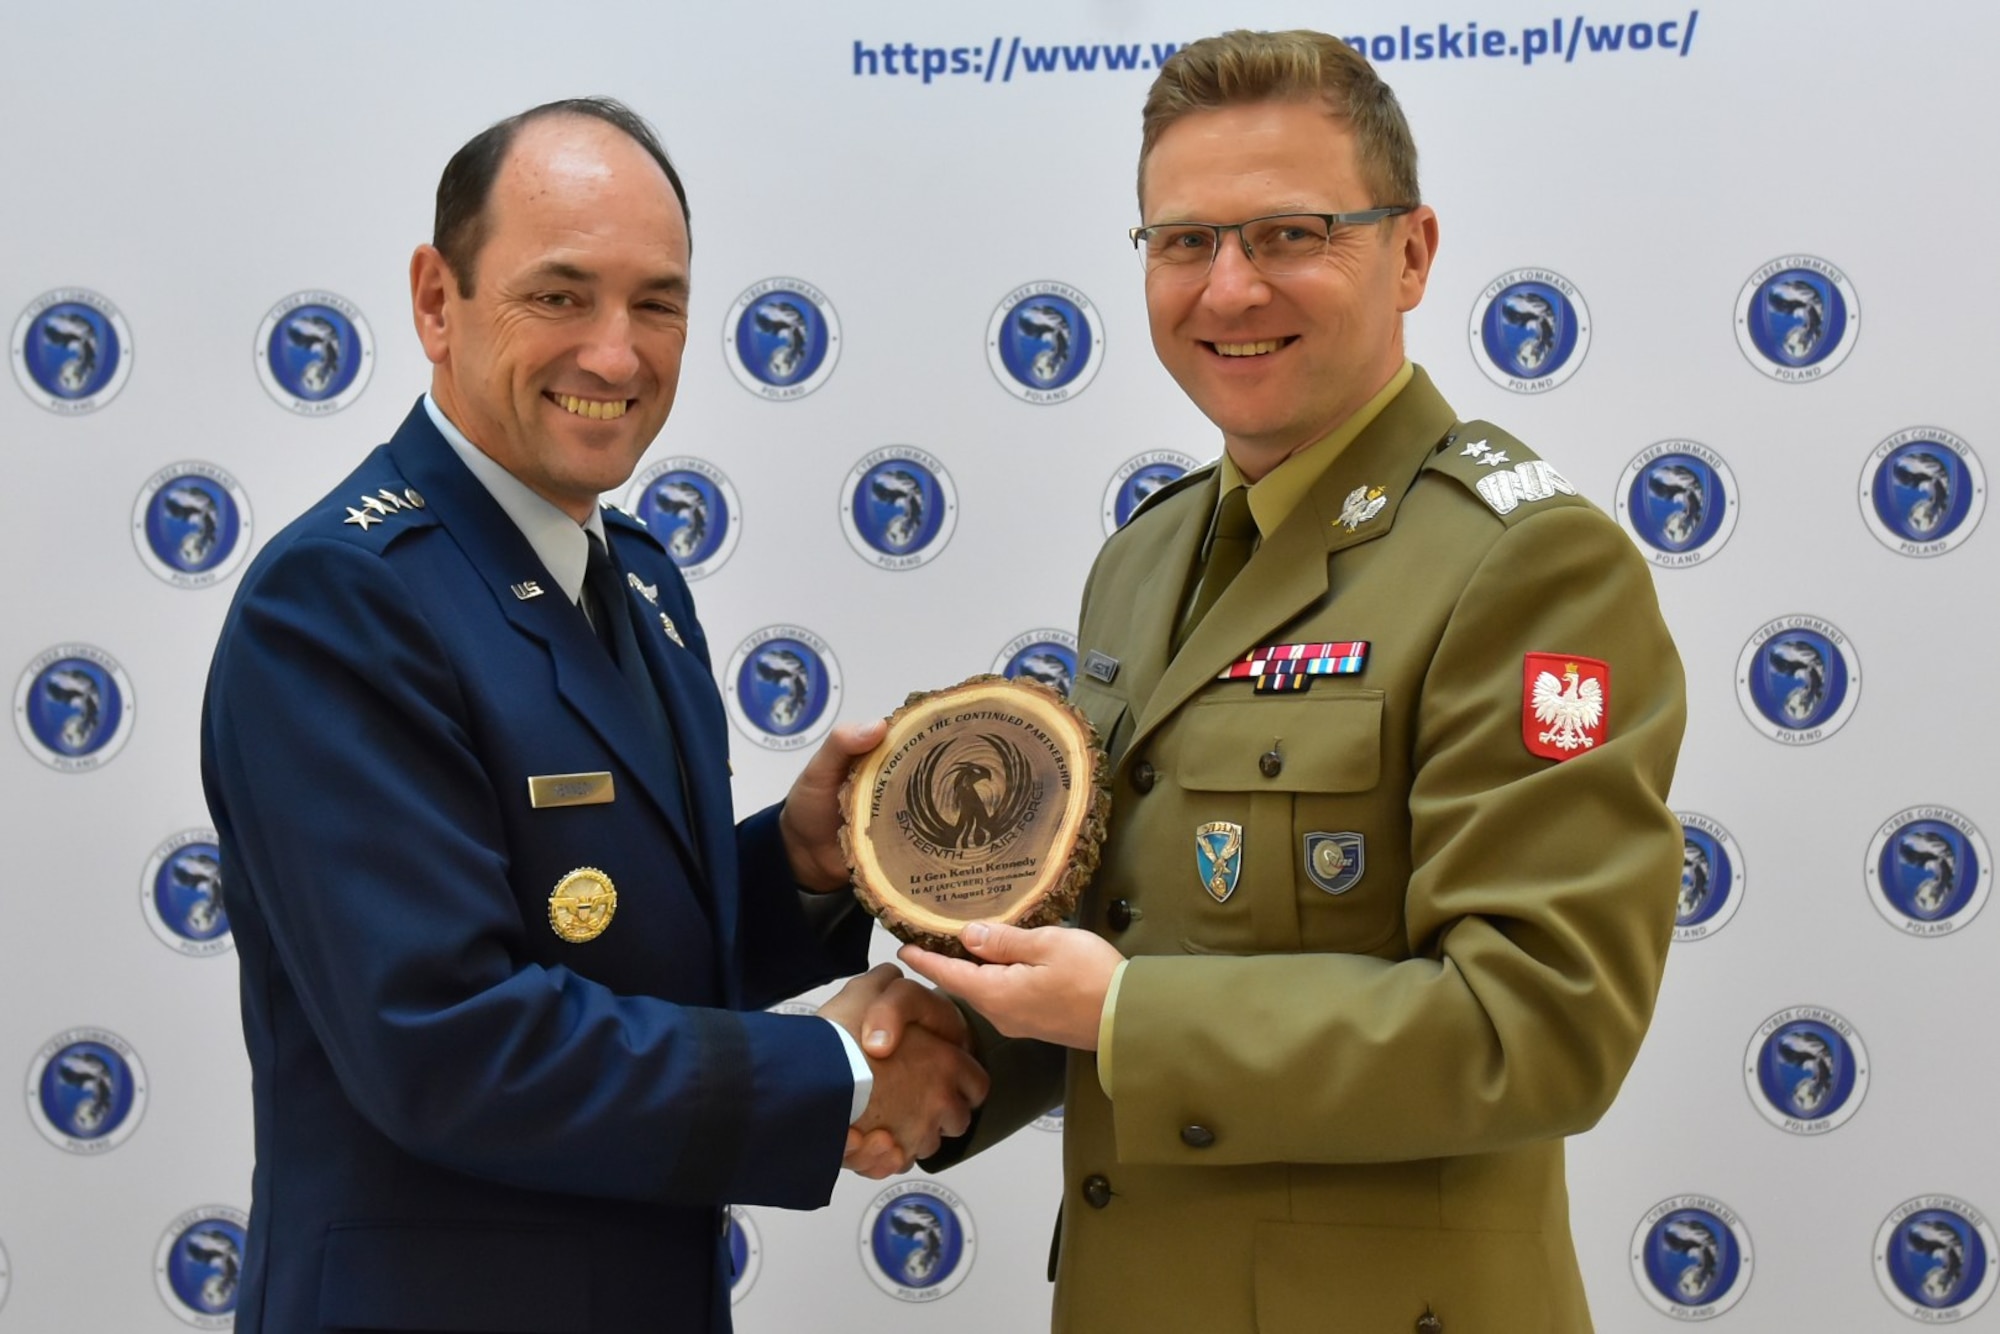 16th Air Force commander is posing with Poland Cyber Command commander.